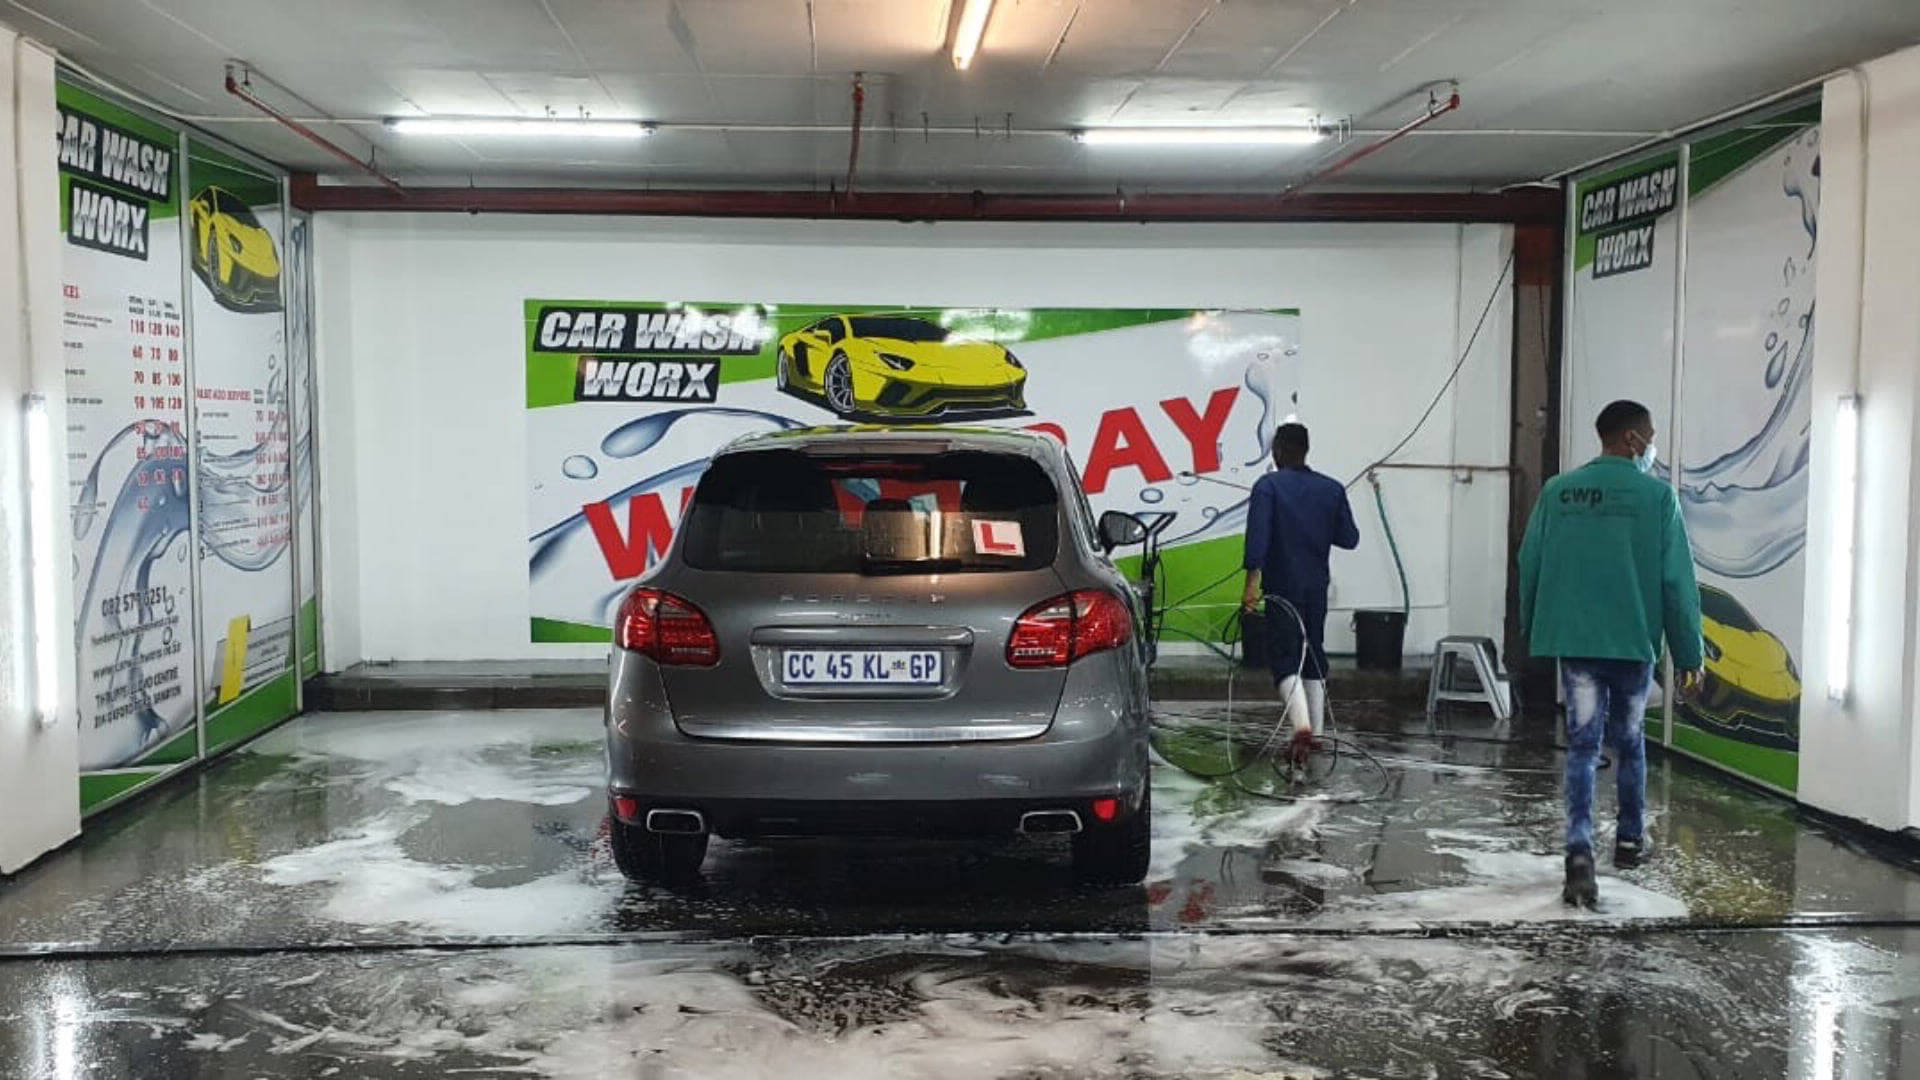 CarWash Worx Thrupps Illovo Centre Branch, Car Wash Franchises Available, CarWash Worx Head Office, Join The Leading Car Wash Franchising Group, Start Your Own Successful Car Wash Business Now